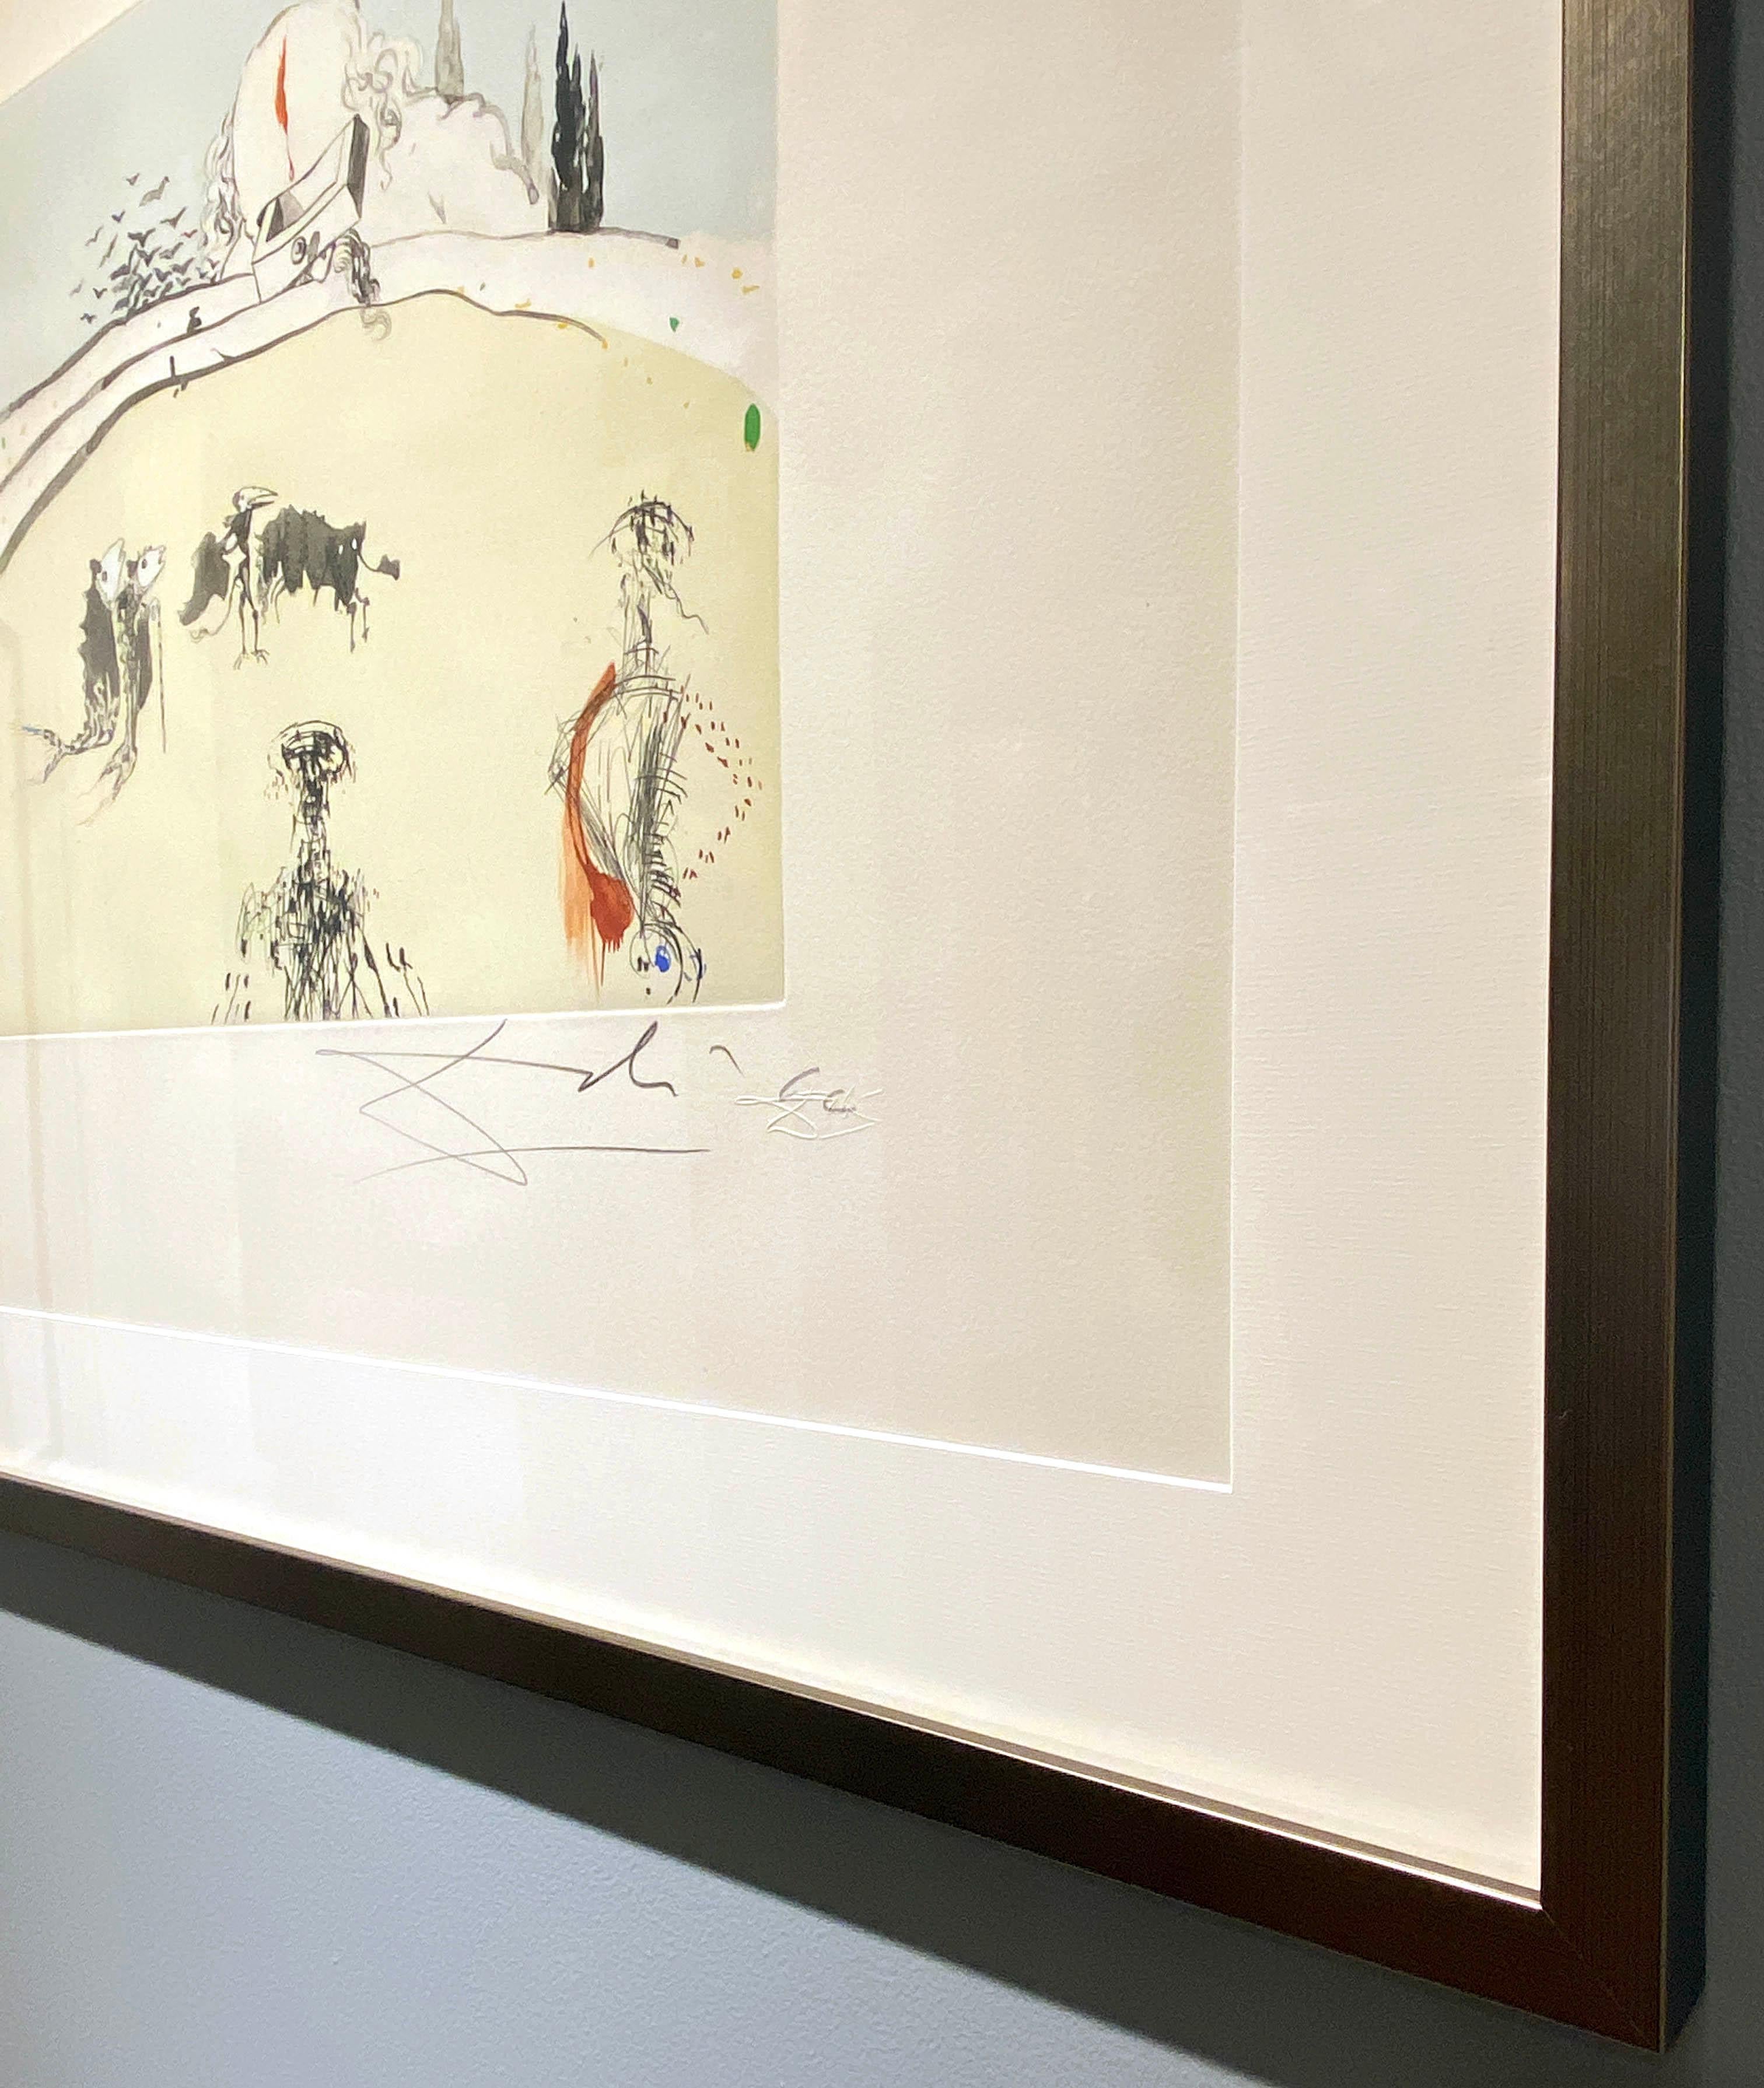 Artist:  Dali, Salvador
Title:  Bullfight with Drawer
Series:  Tauramachie Surrealiste (Bullfight III)
Date:  1966-1967
Medium:  Etching with Aquatint on Arches
Unframed Dimensions:  19